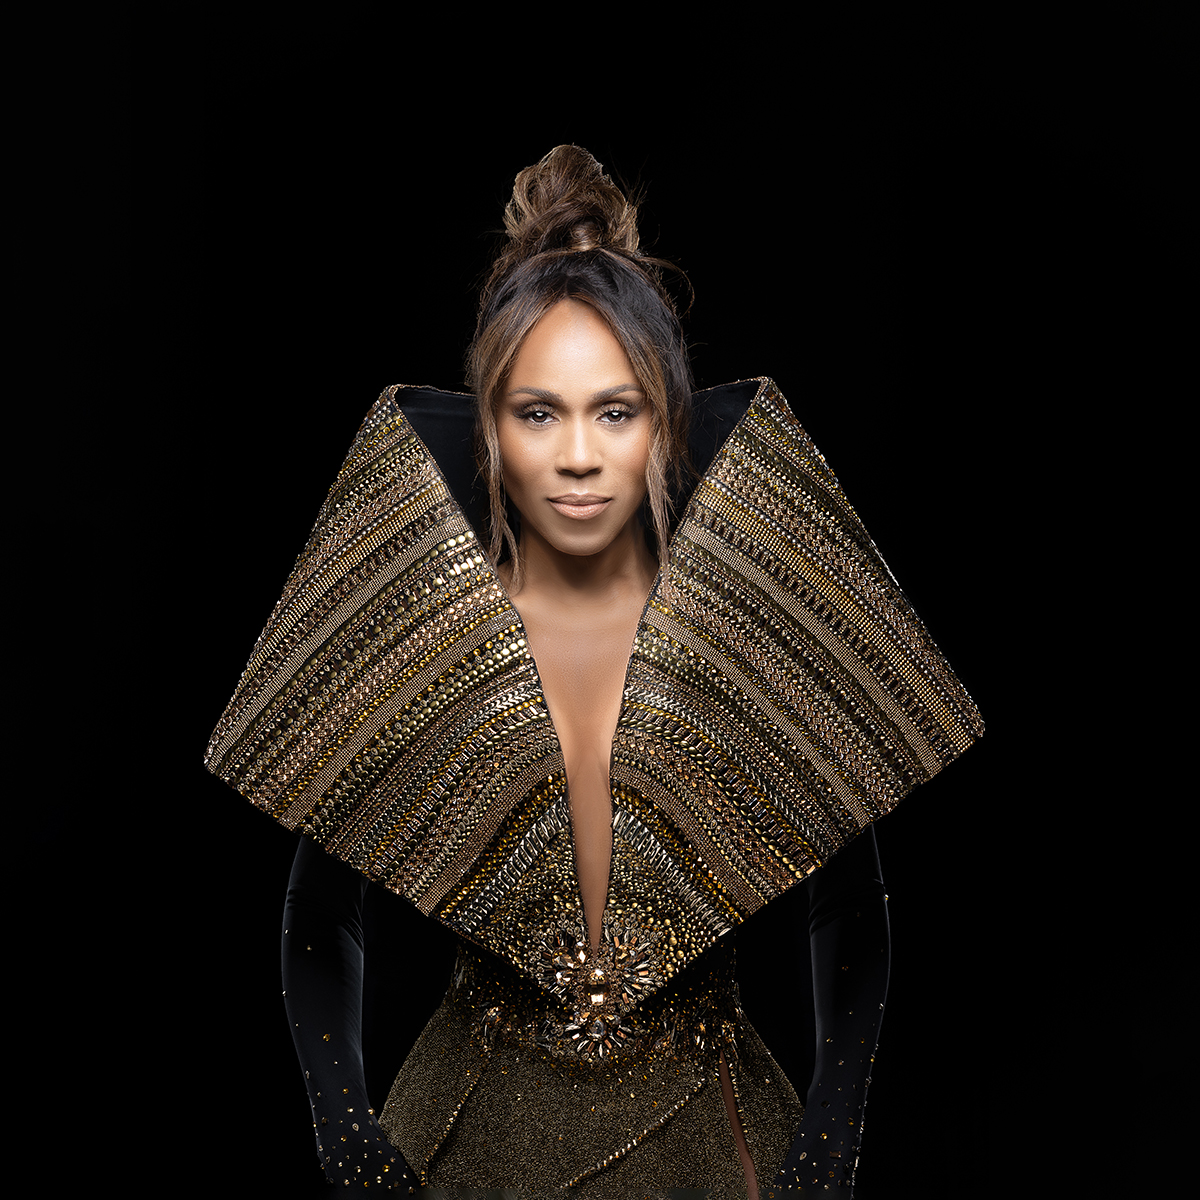 Deborah Cox to be inducted into the Canadian Music Hall of Fame at The 51st Annual JUNO Awards